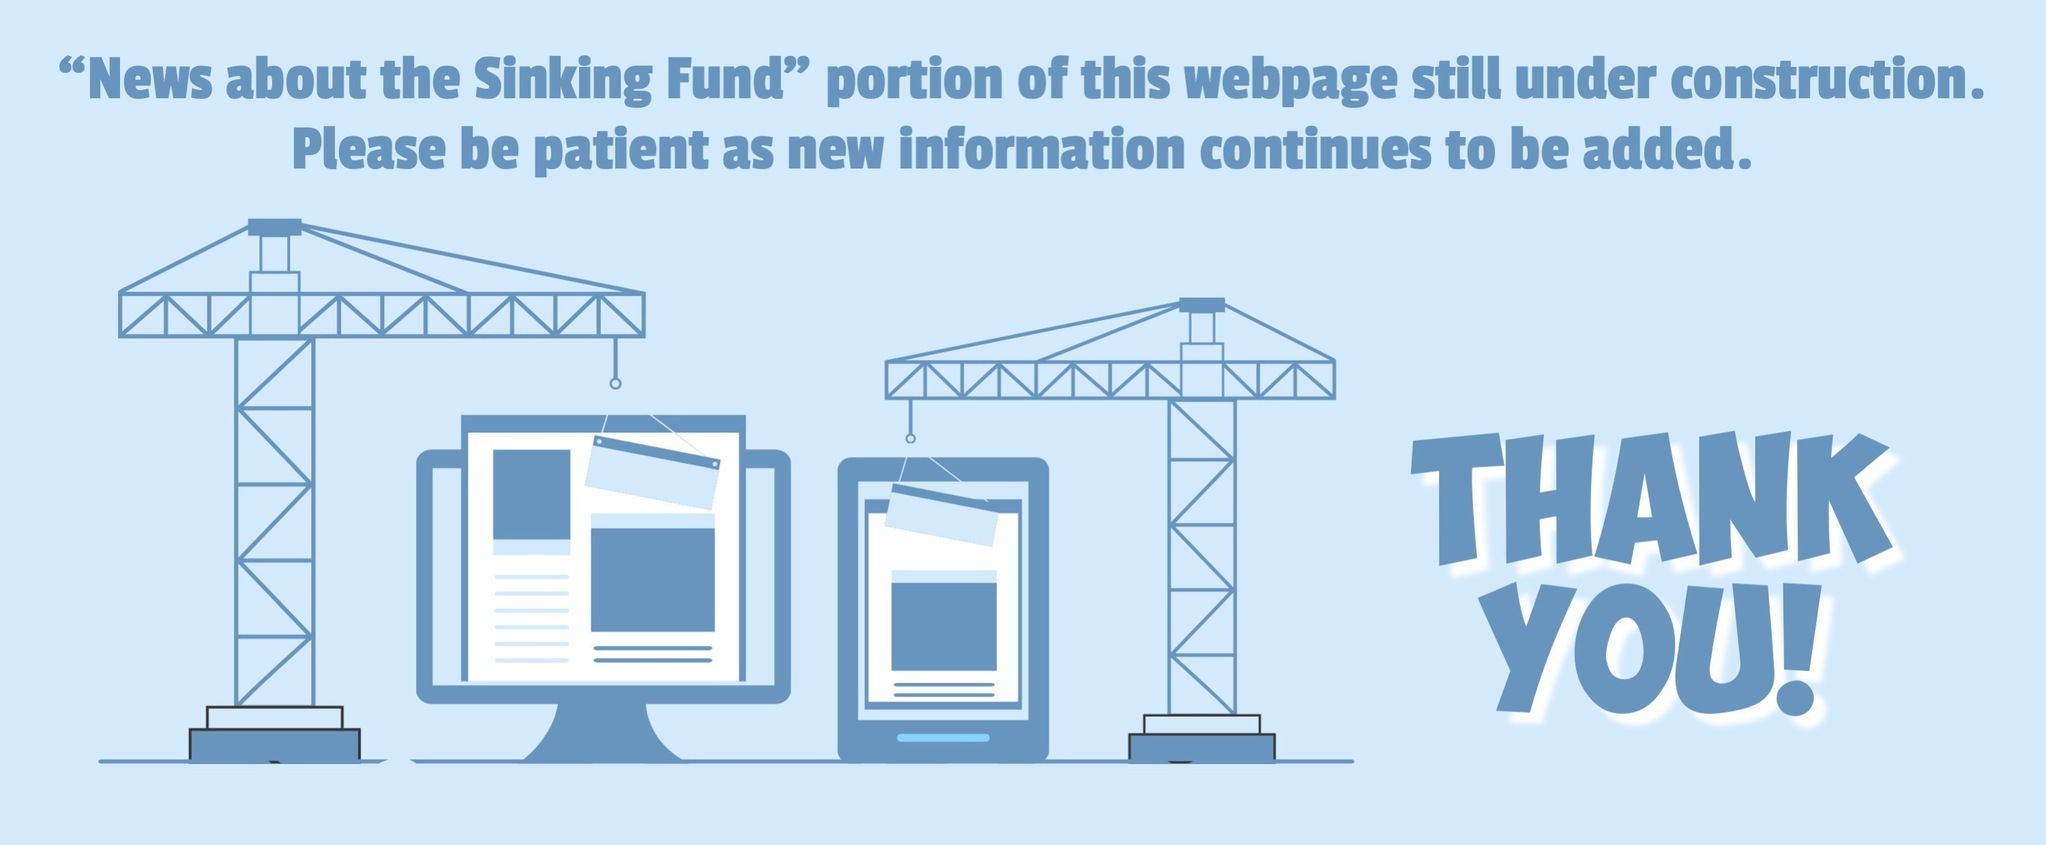 News about the Sinking Fund portion of webpage still under construction.